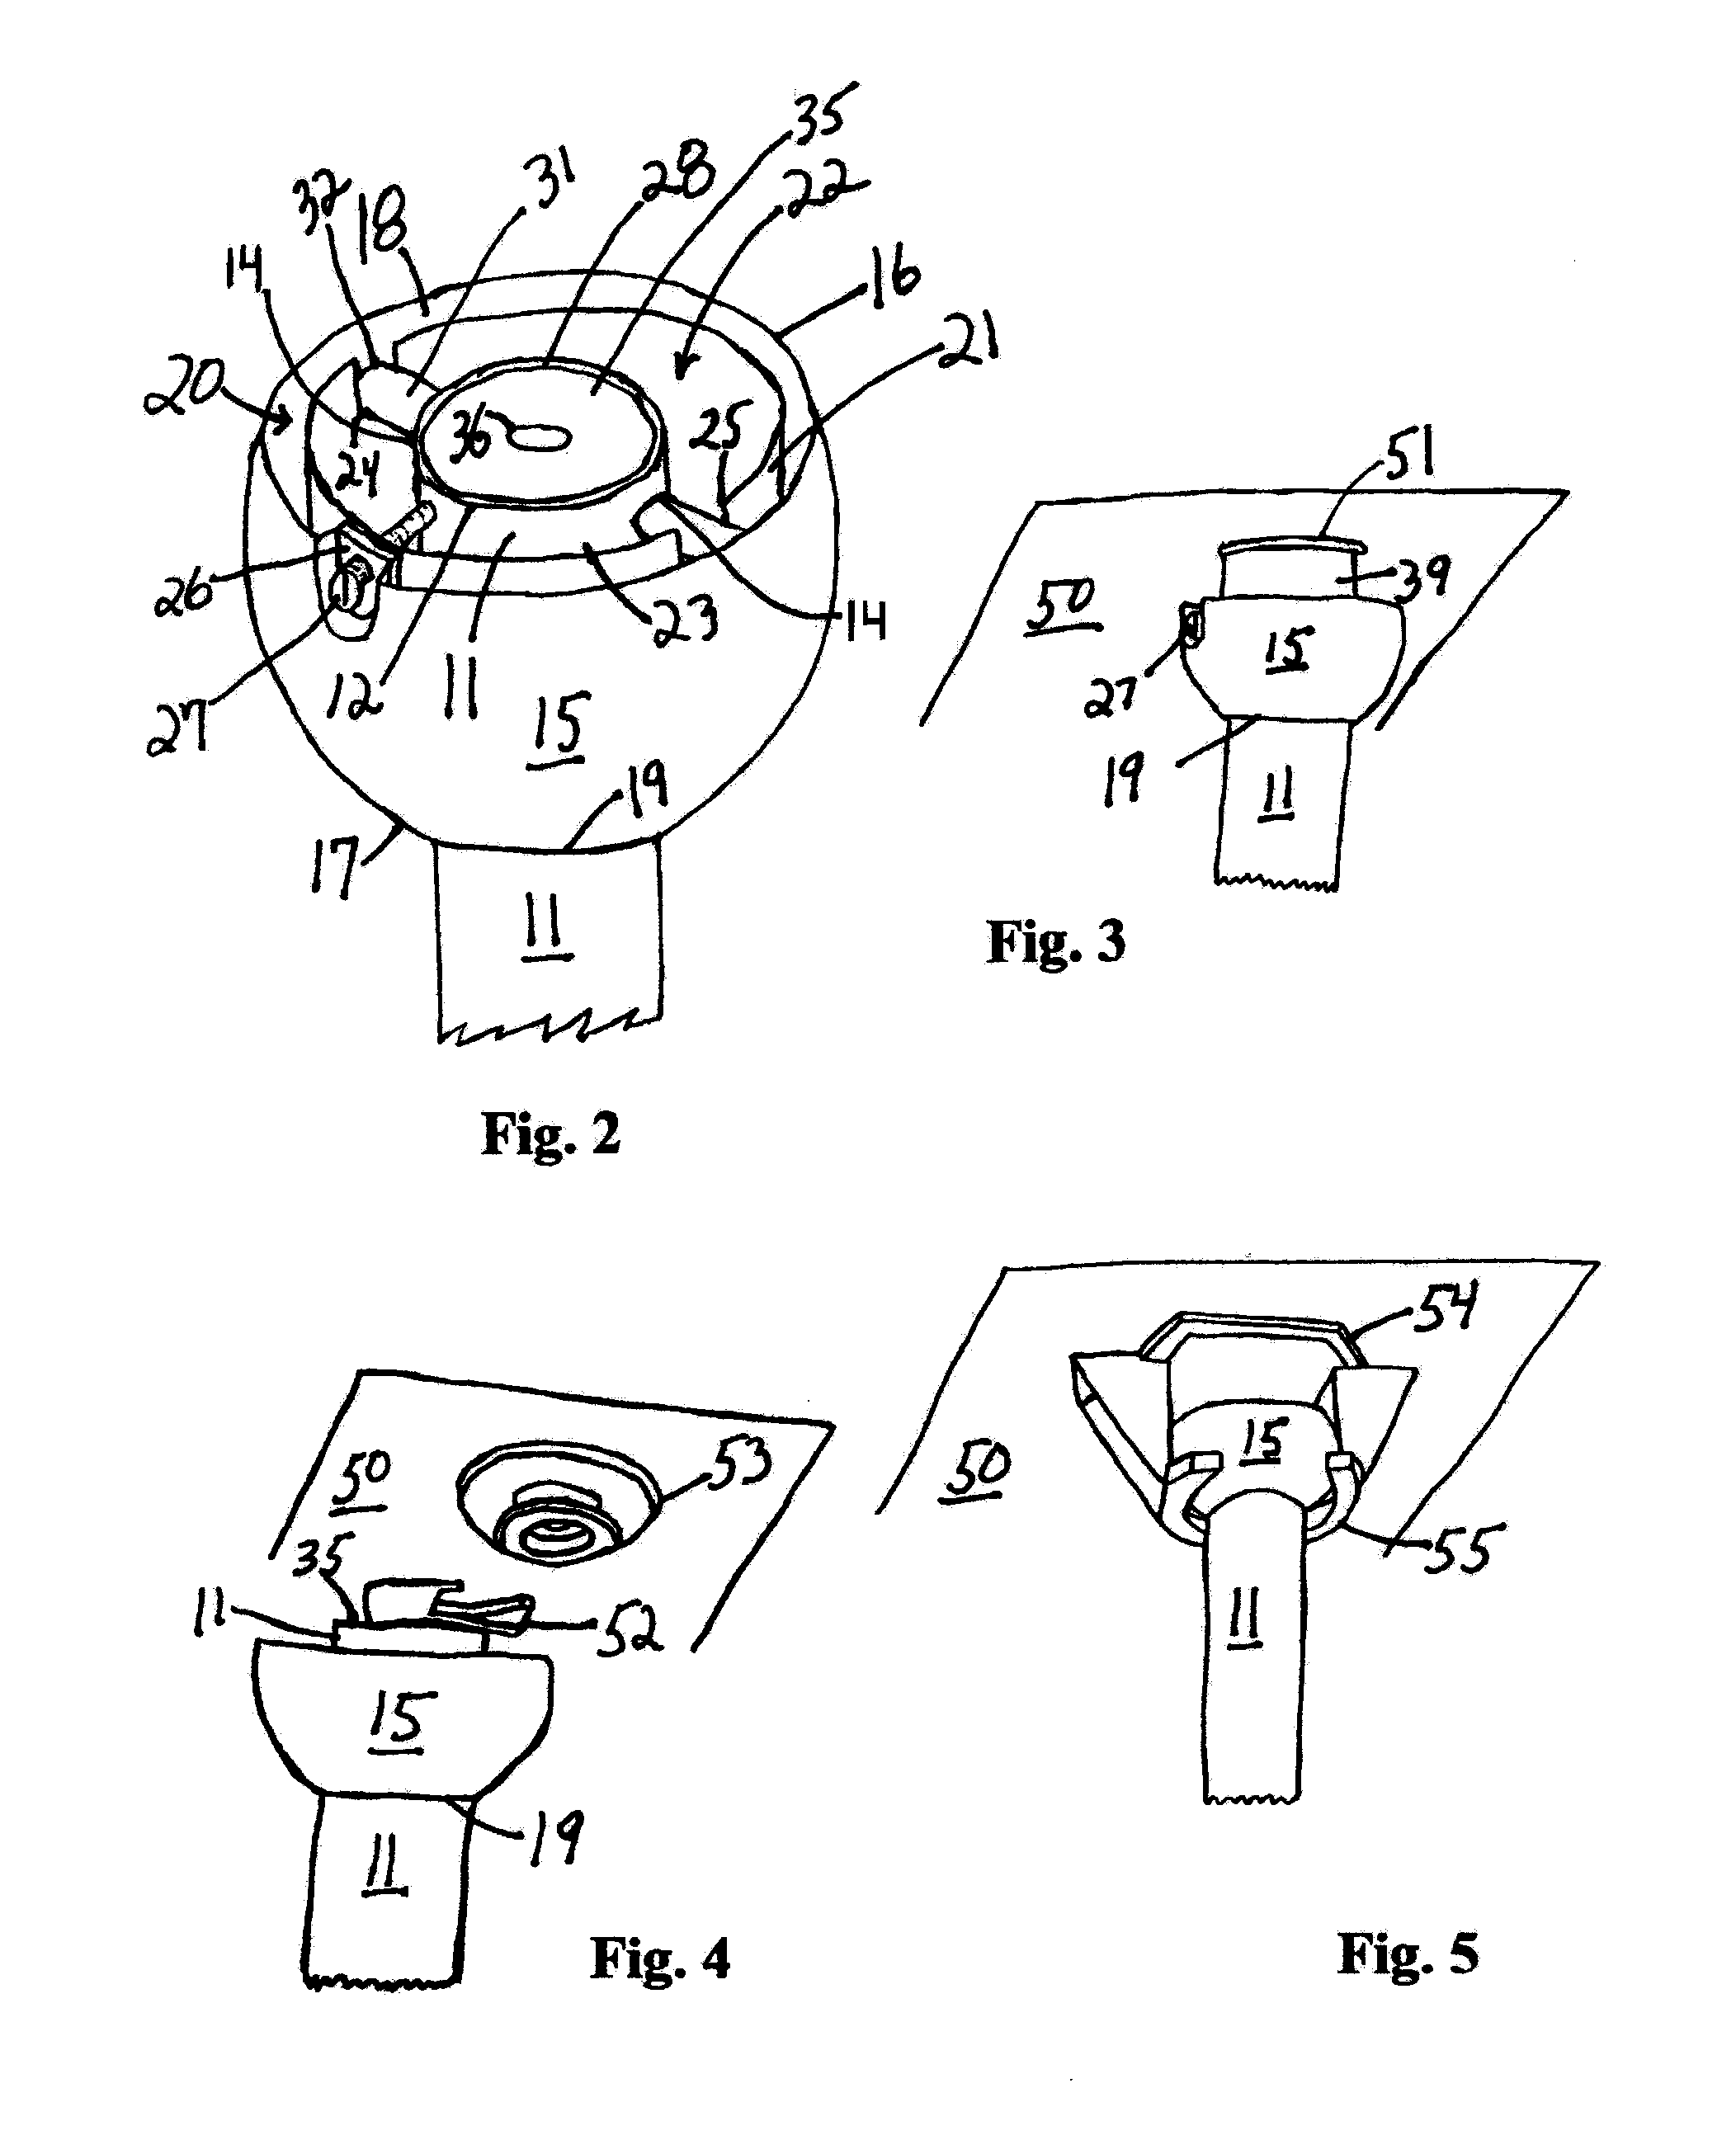 Smartphone or tablet mounting device and method